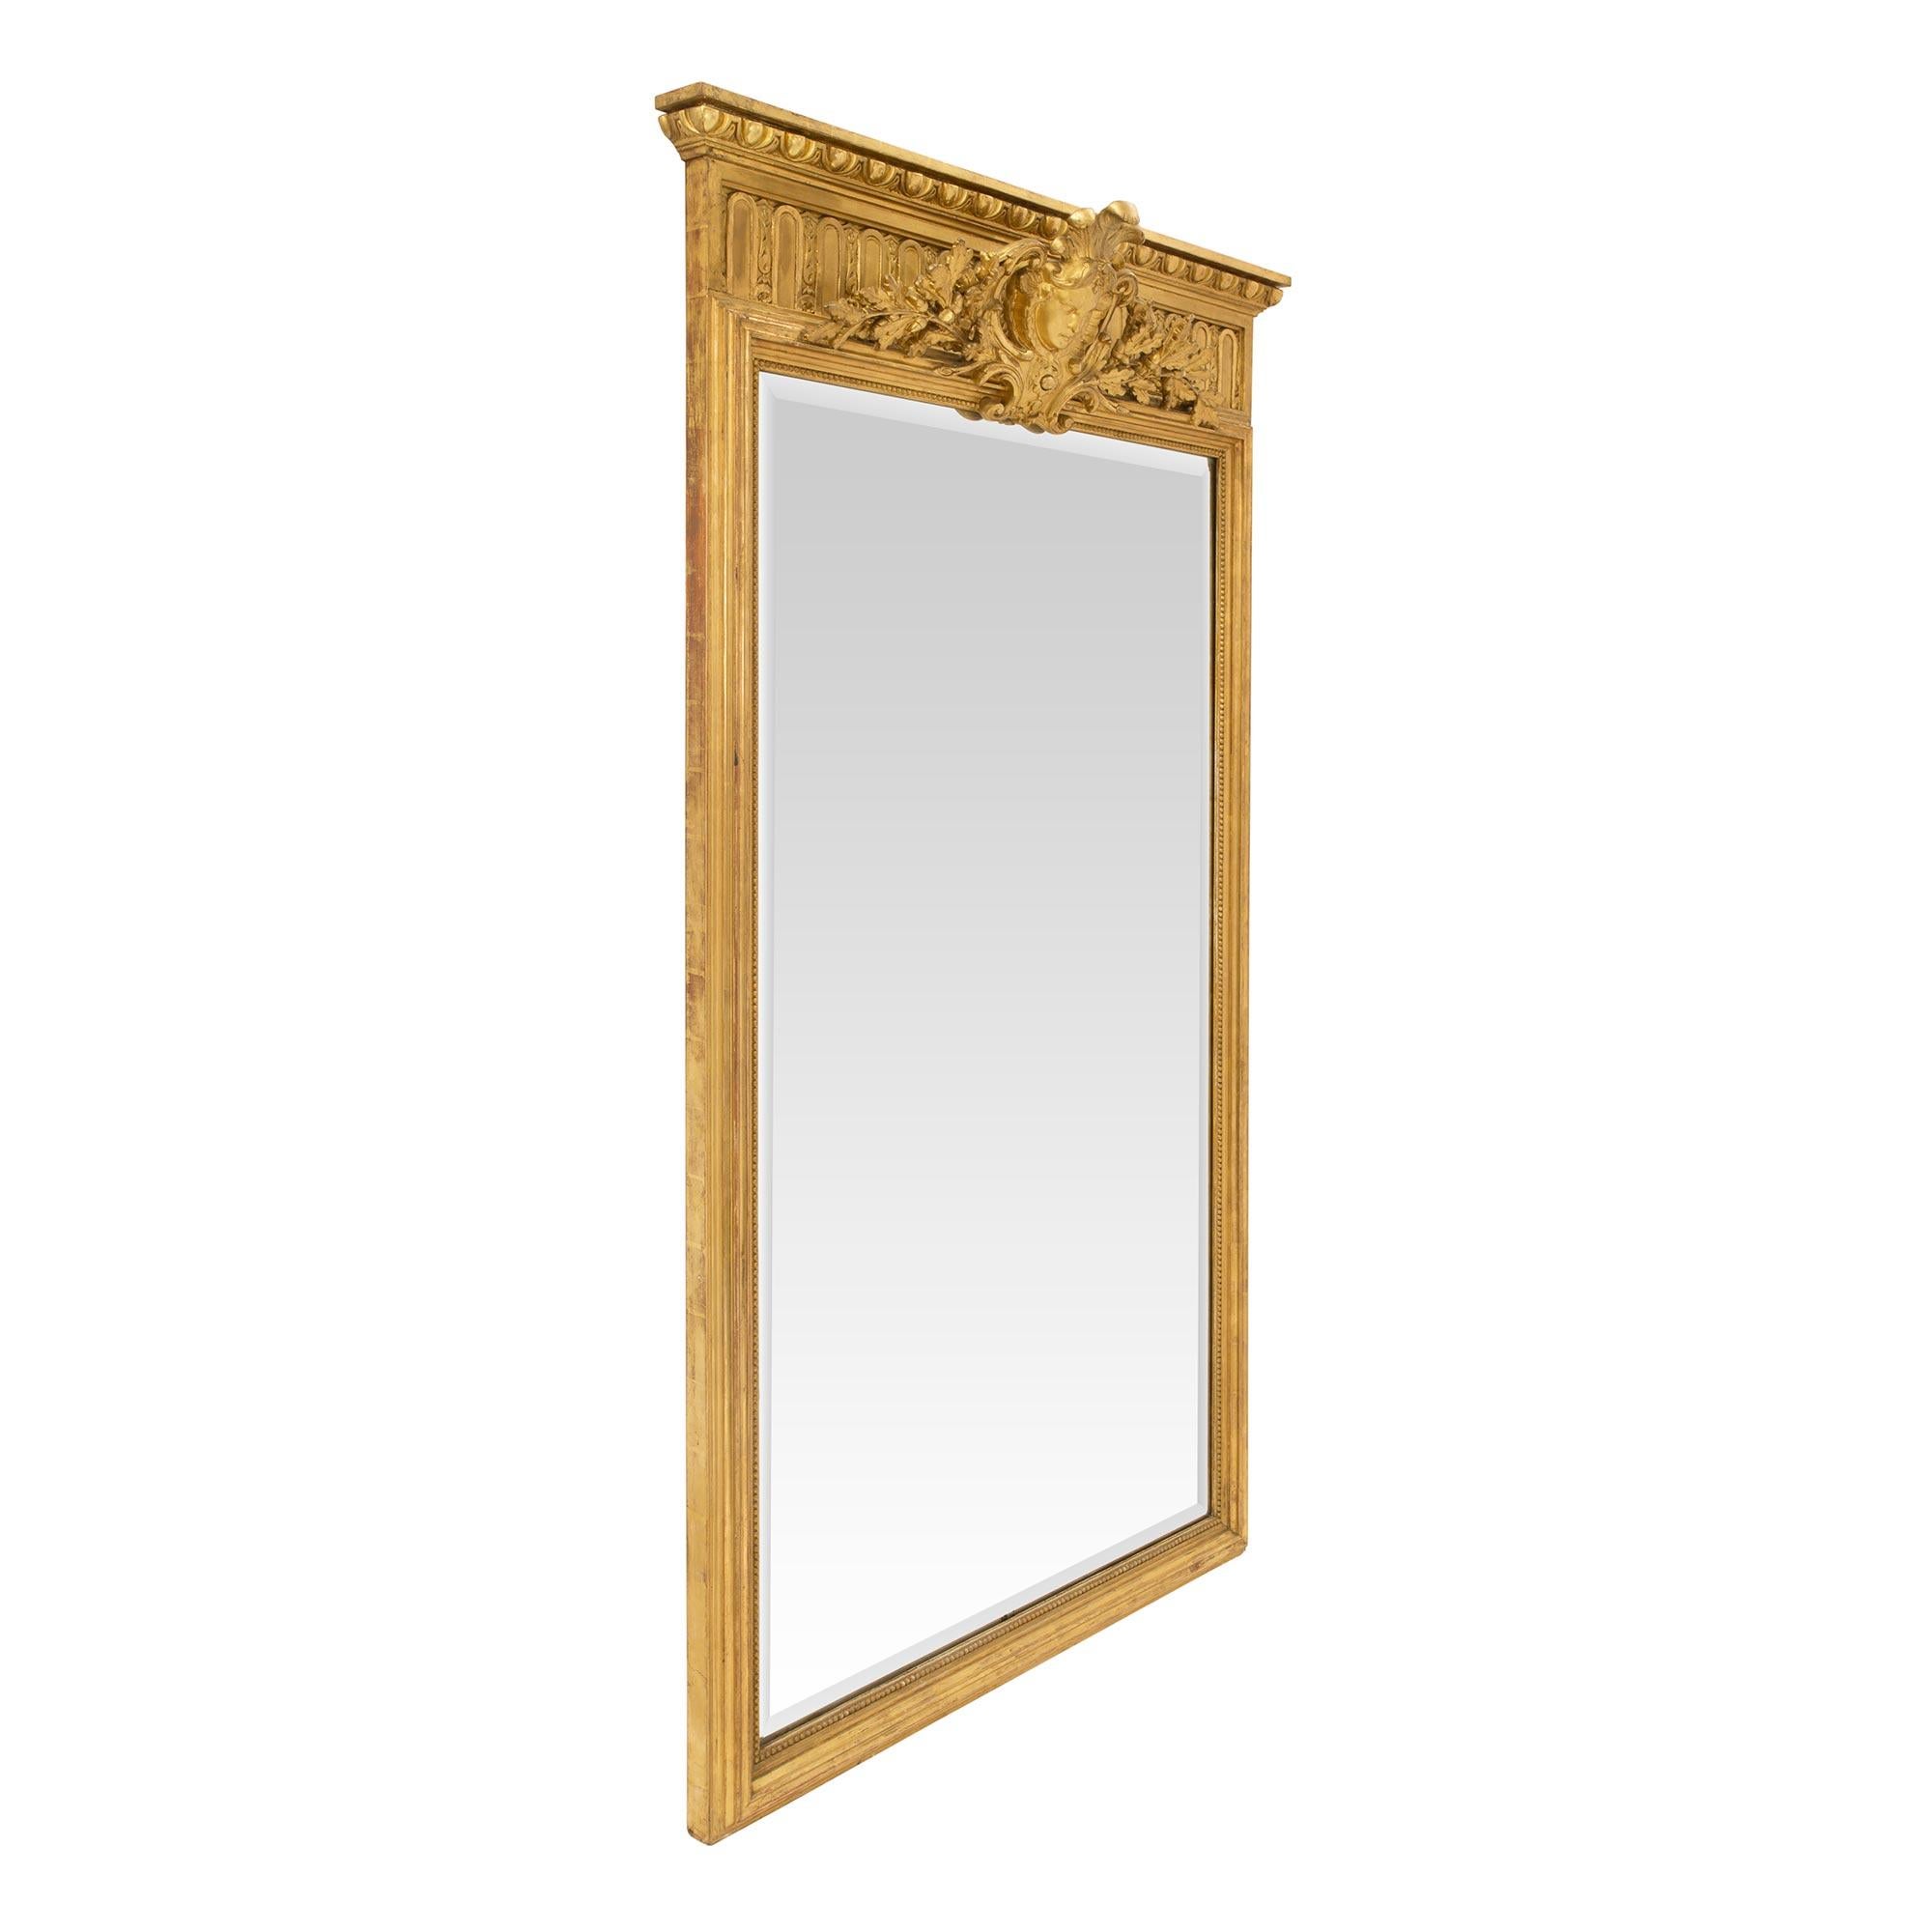 A handsome and powerful mid 19th century French Louis xiv st. Giltwood mirror. The Fluted sides and bottom with all original Watergilt burnished gold leaf balances a Wonderfully decorative carved top with The face of Louis XIV decorated with five